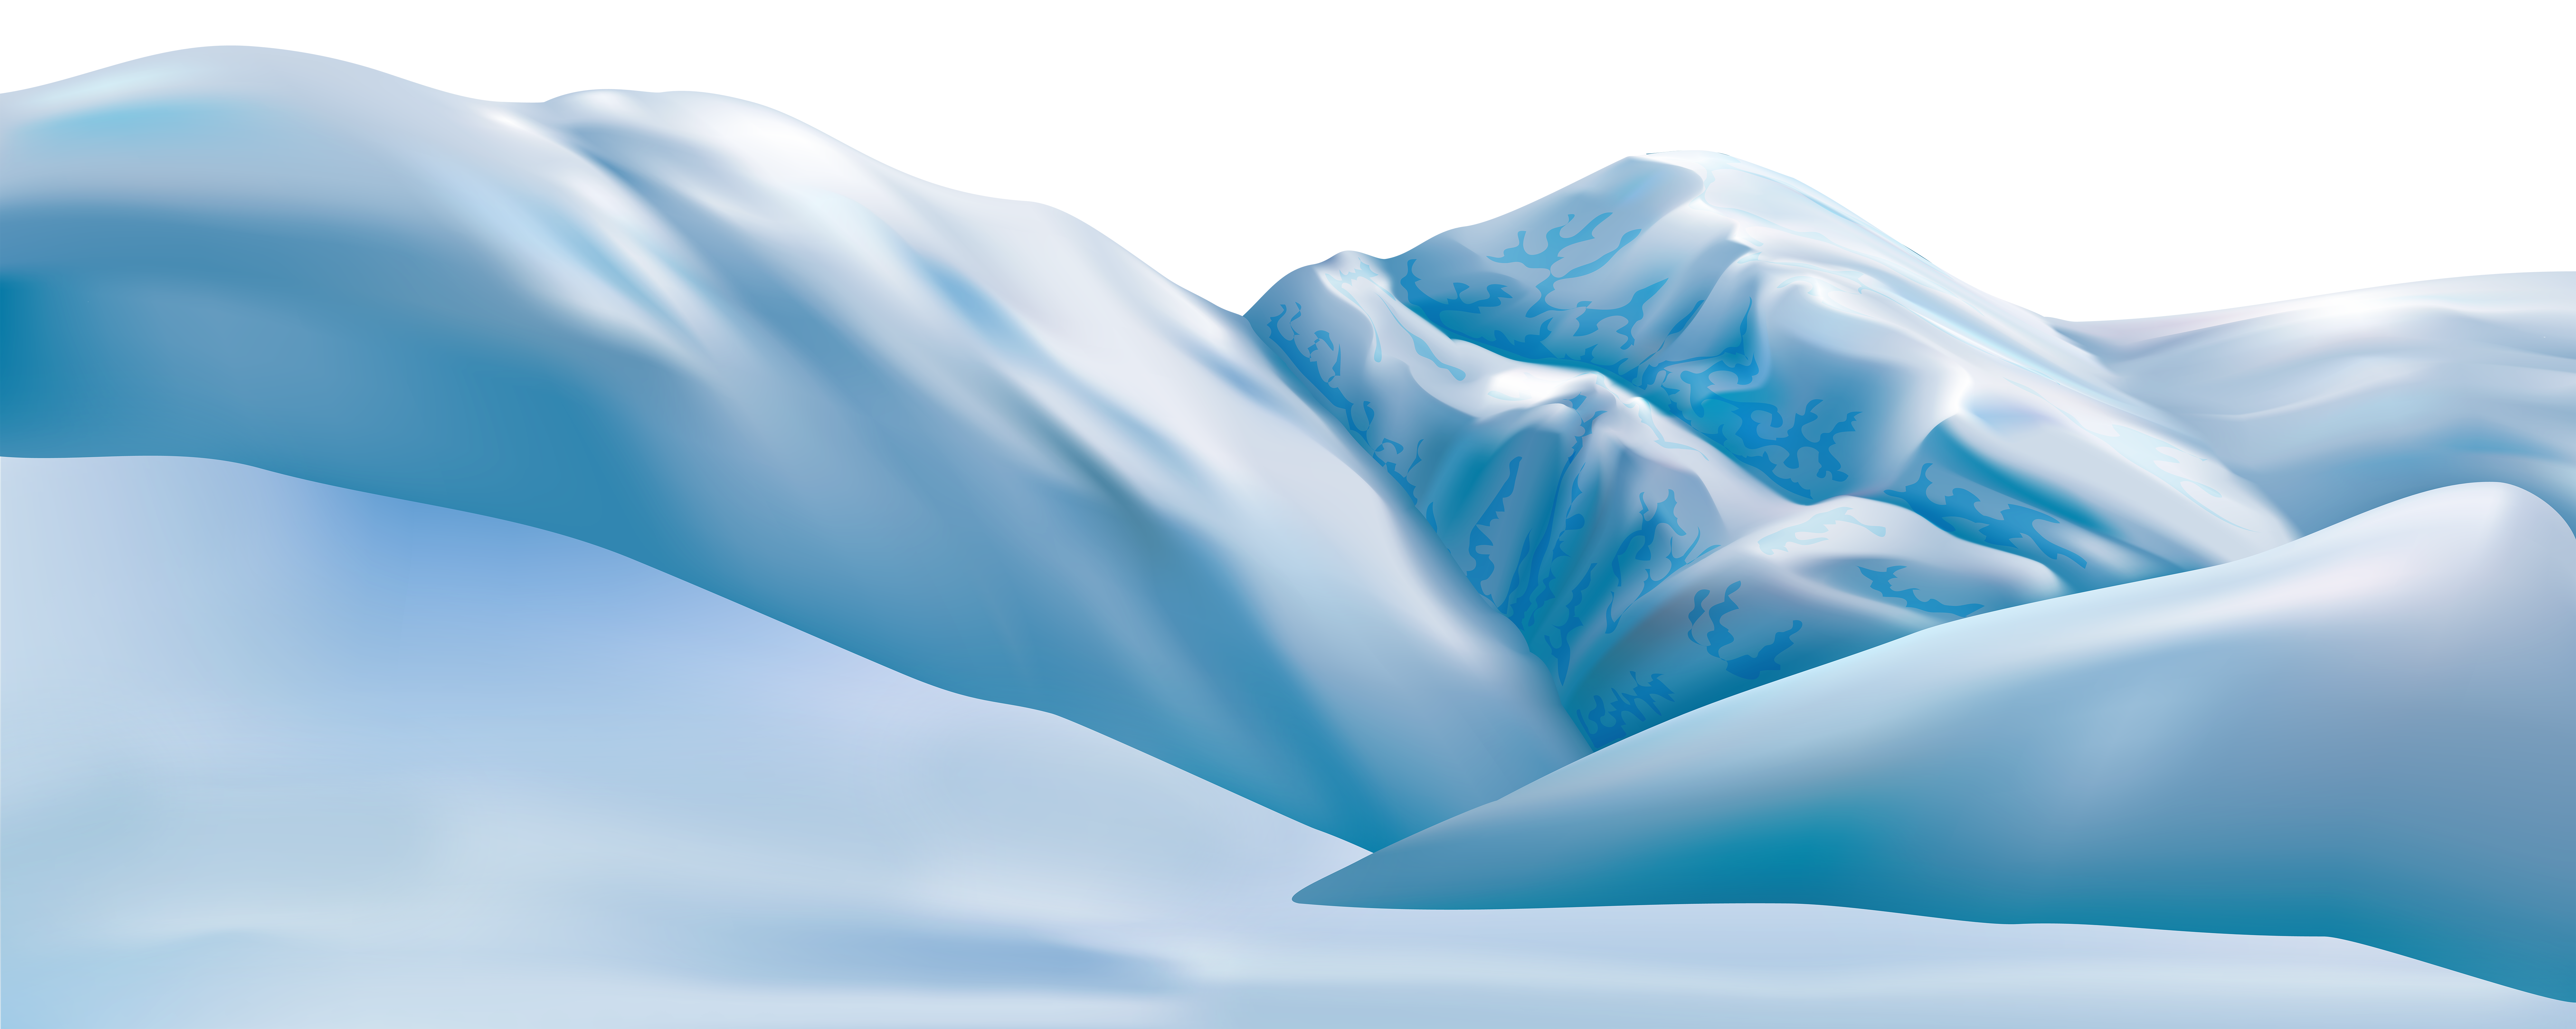 clipart snowy mountains